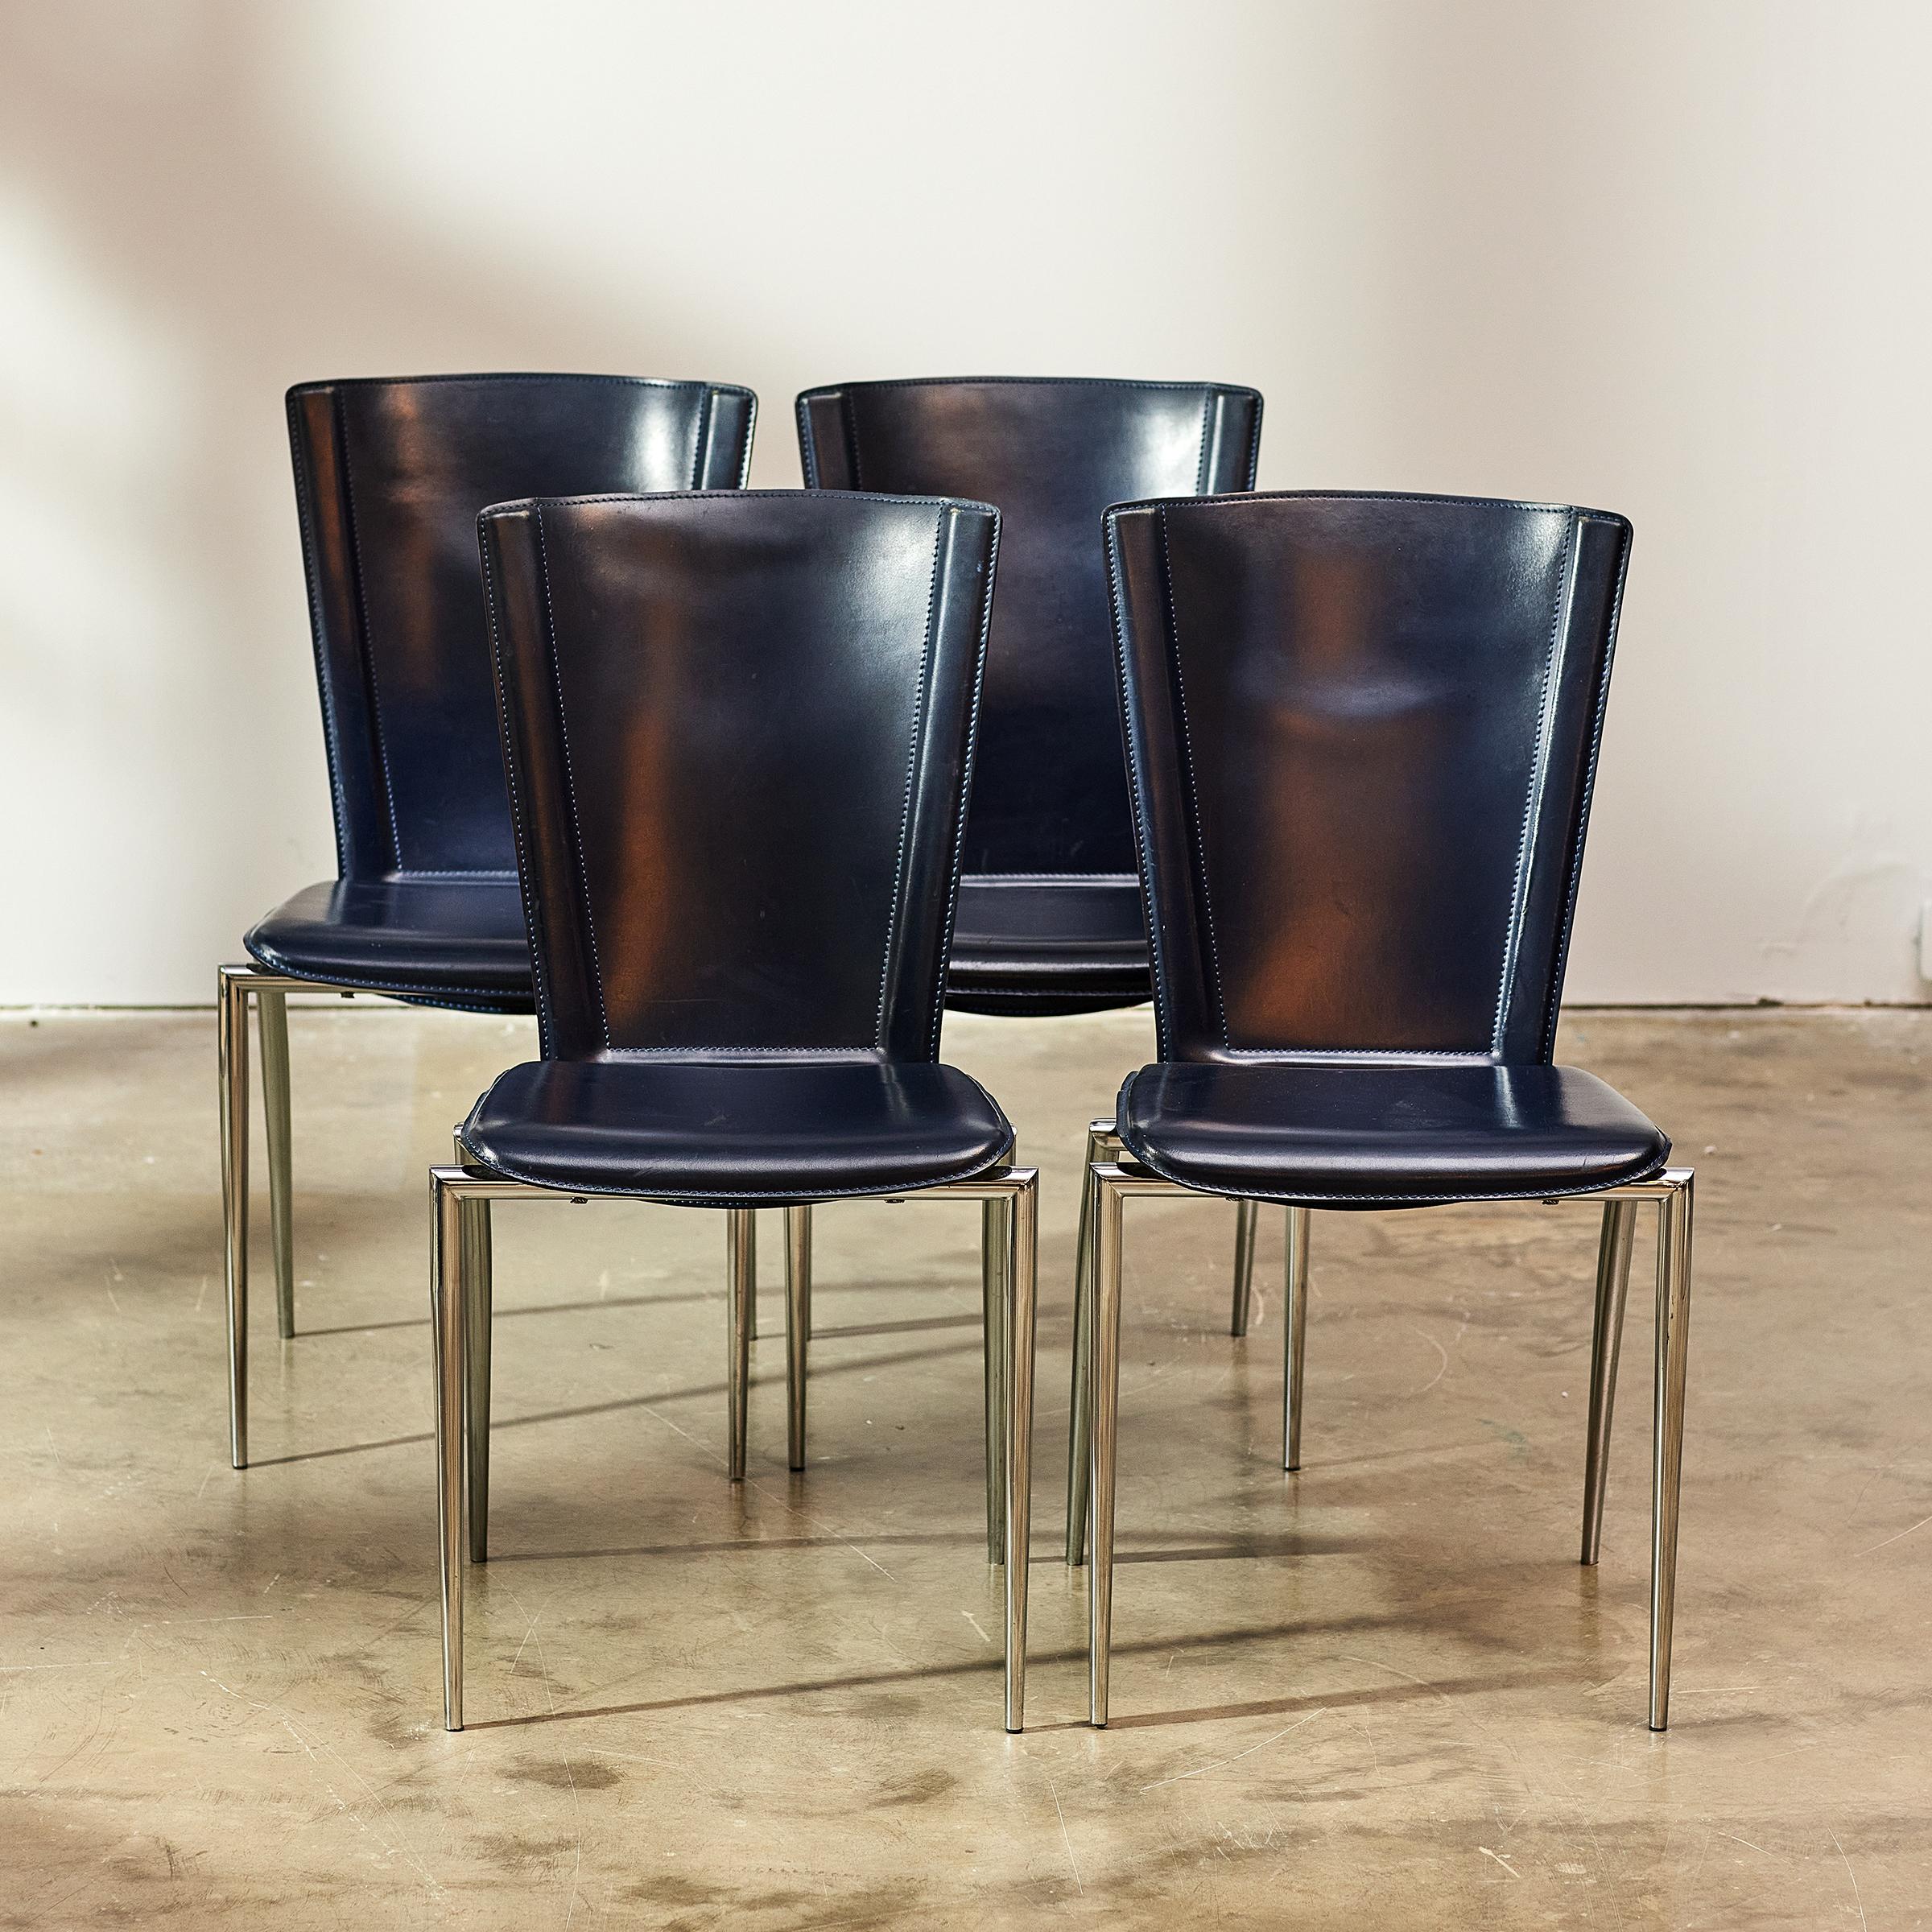 These four 1980s Italian depp blue leather dining chairs by Frag feature an exquisite postmodern design—with a slender back, tapered legs and a unique floating ergonomic seat.

